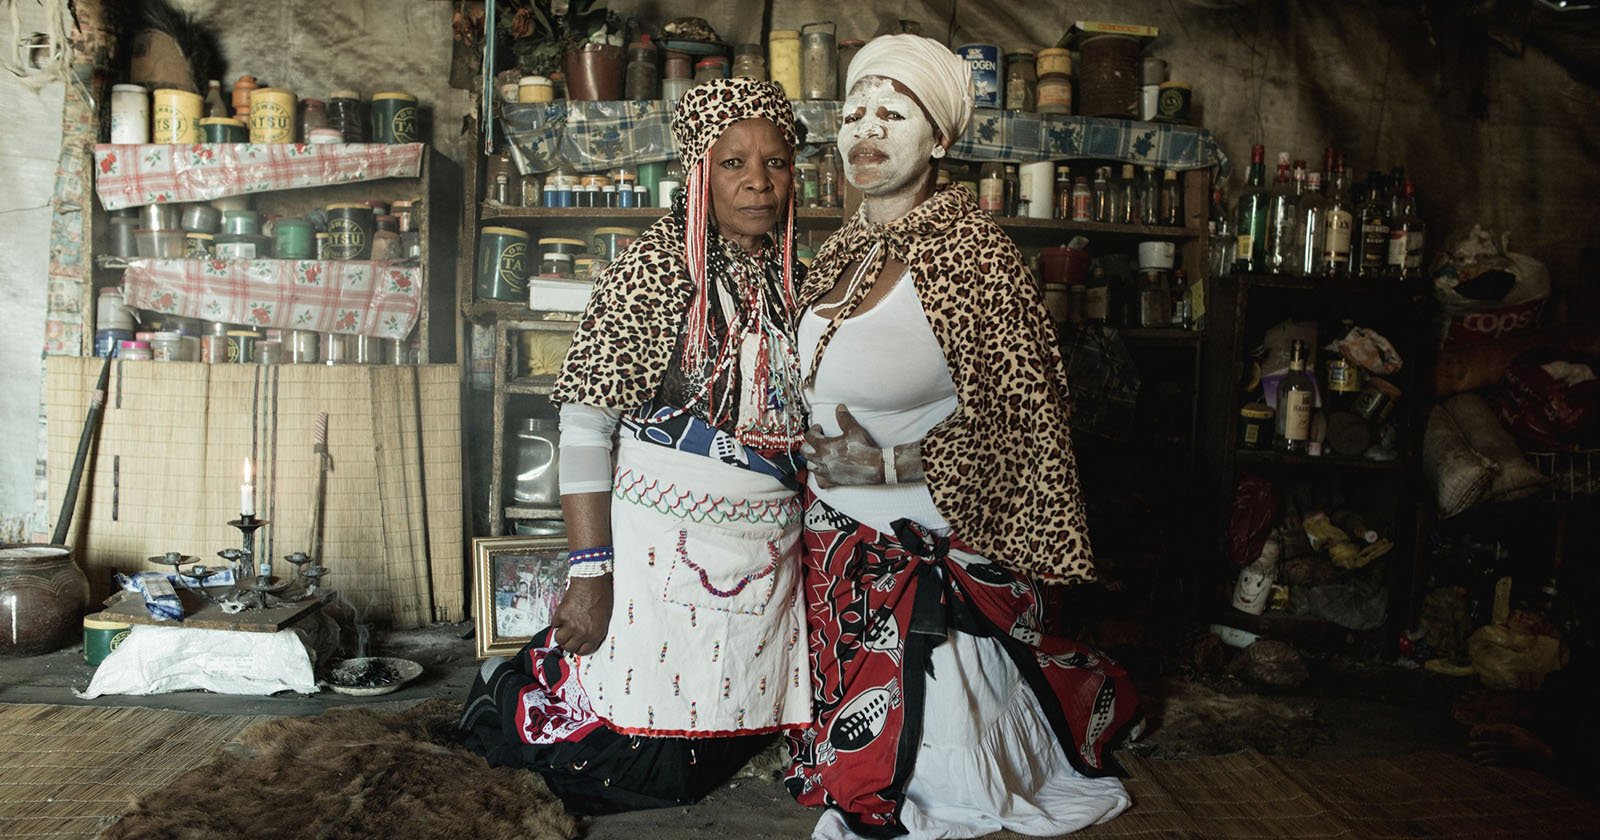 Sangoma: Photos of Traditional Healers in South Africa | PetaPixel